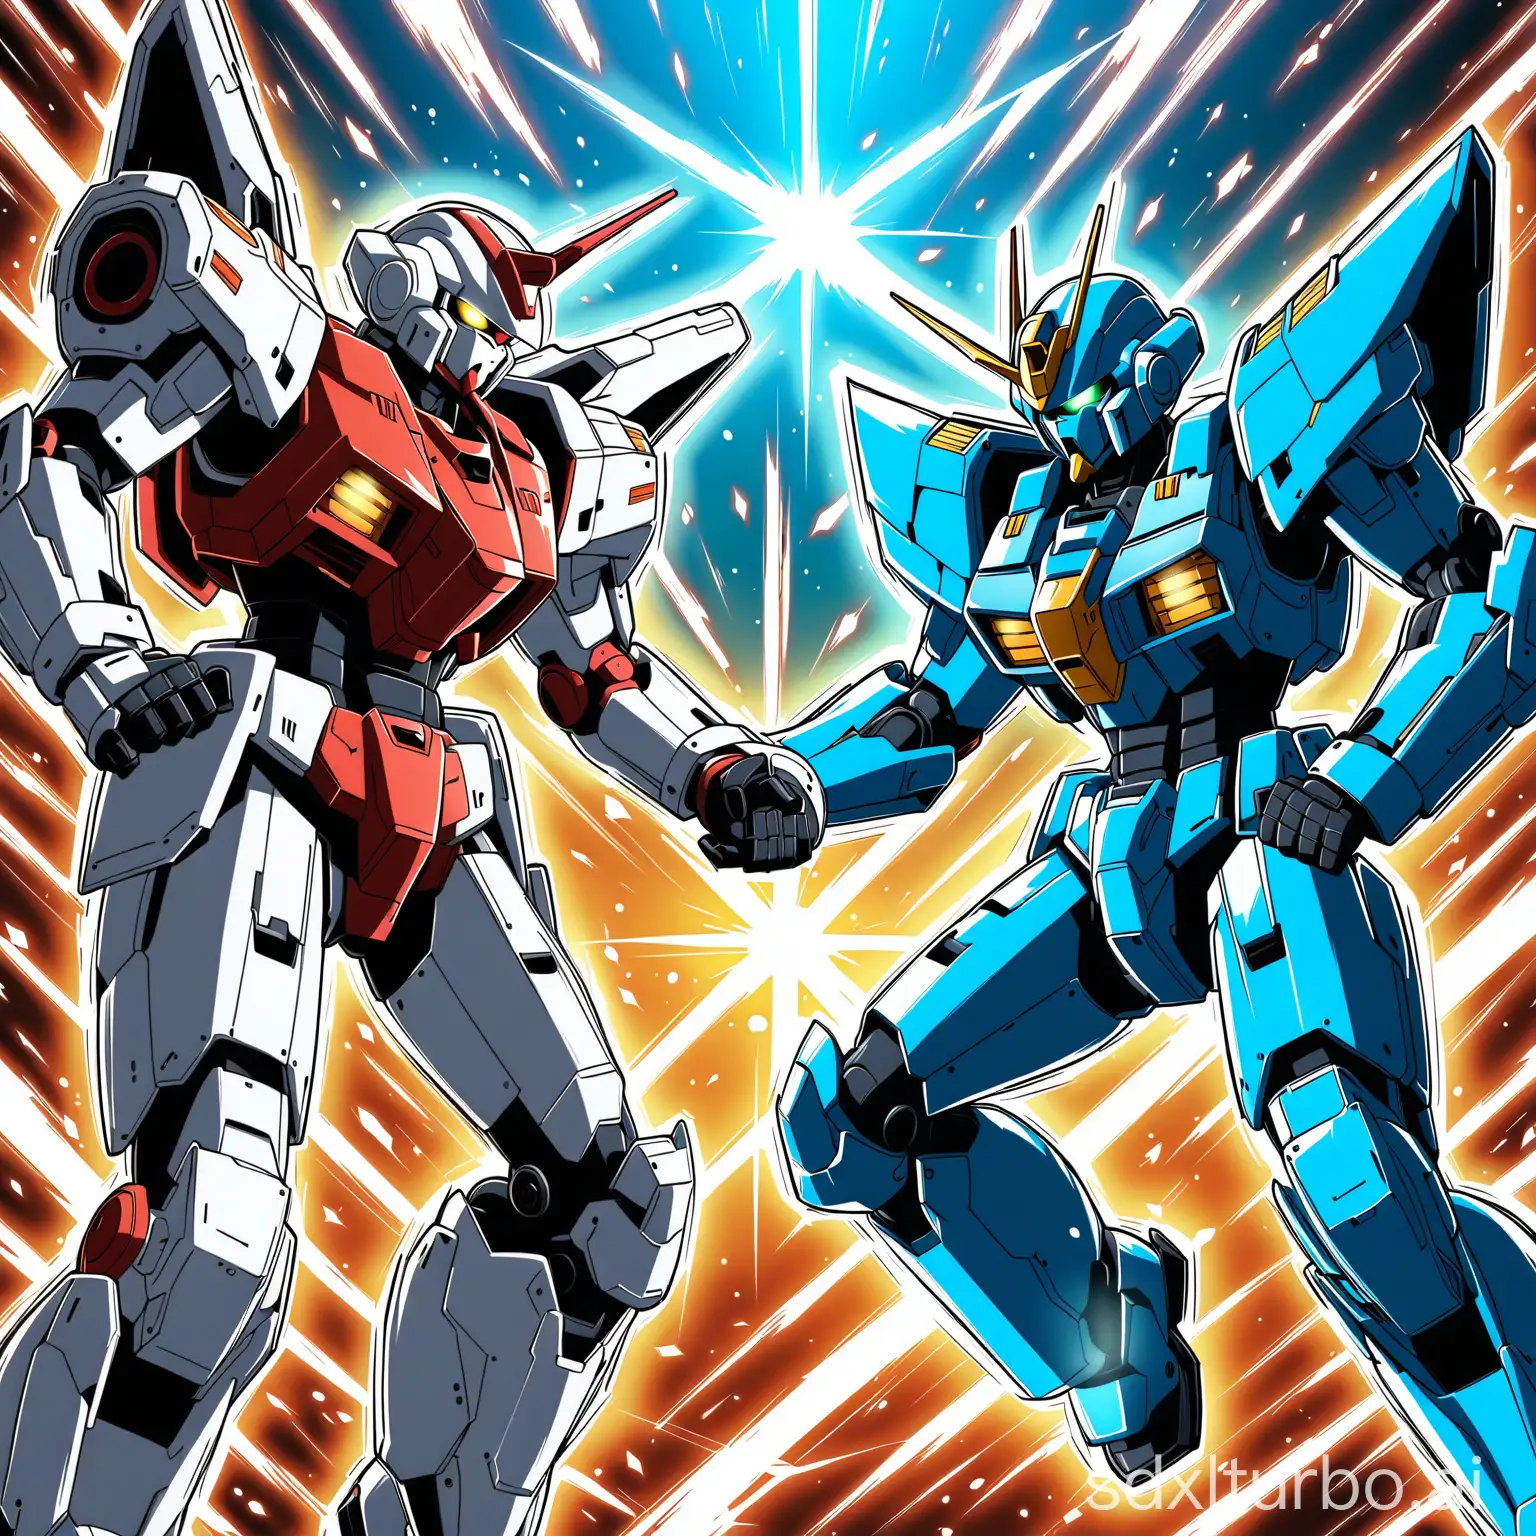 Young people fighting each other in mobile suits, Japanese anime